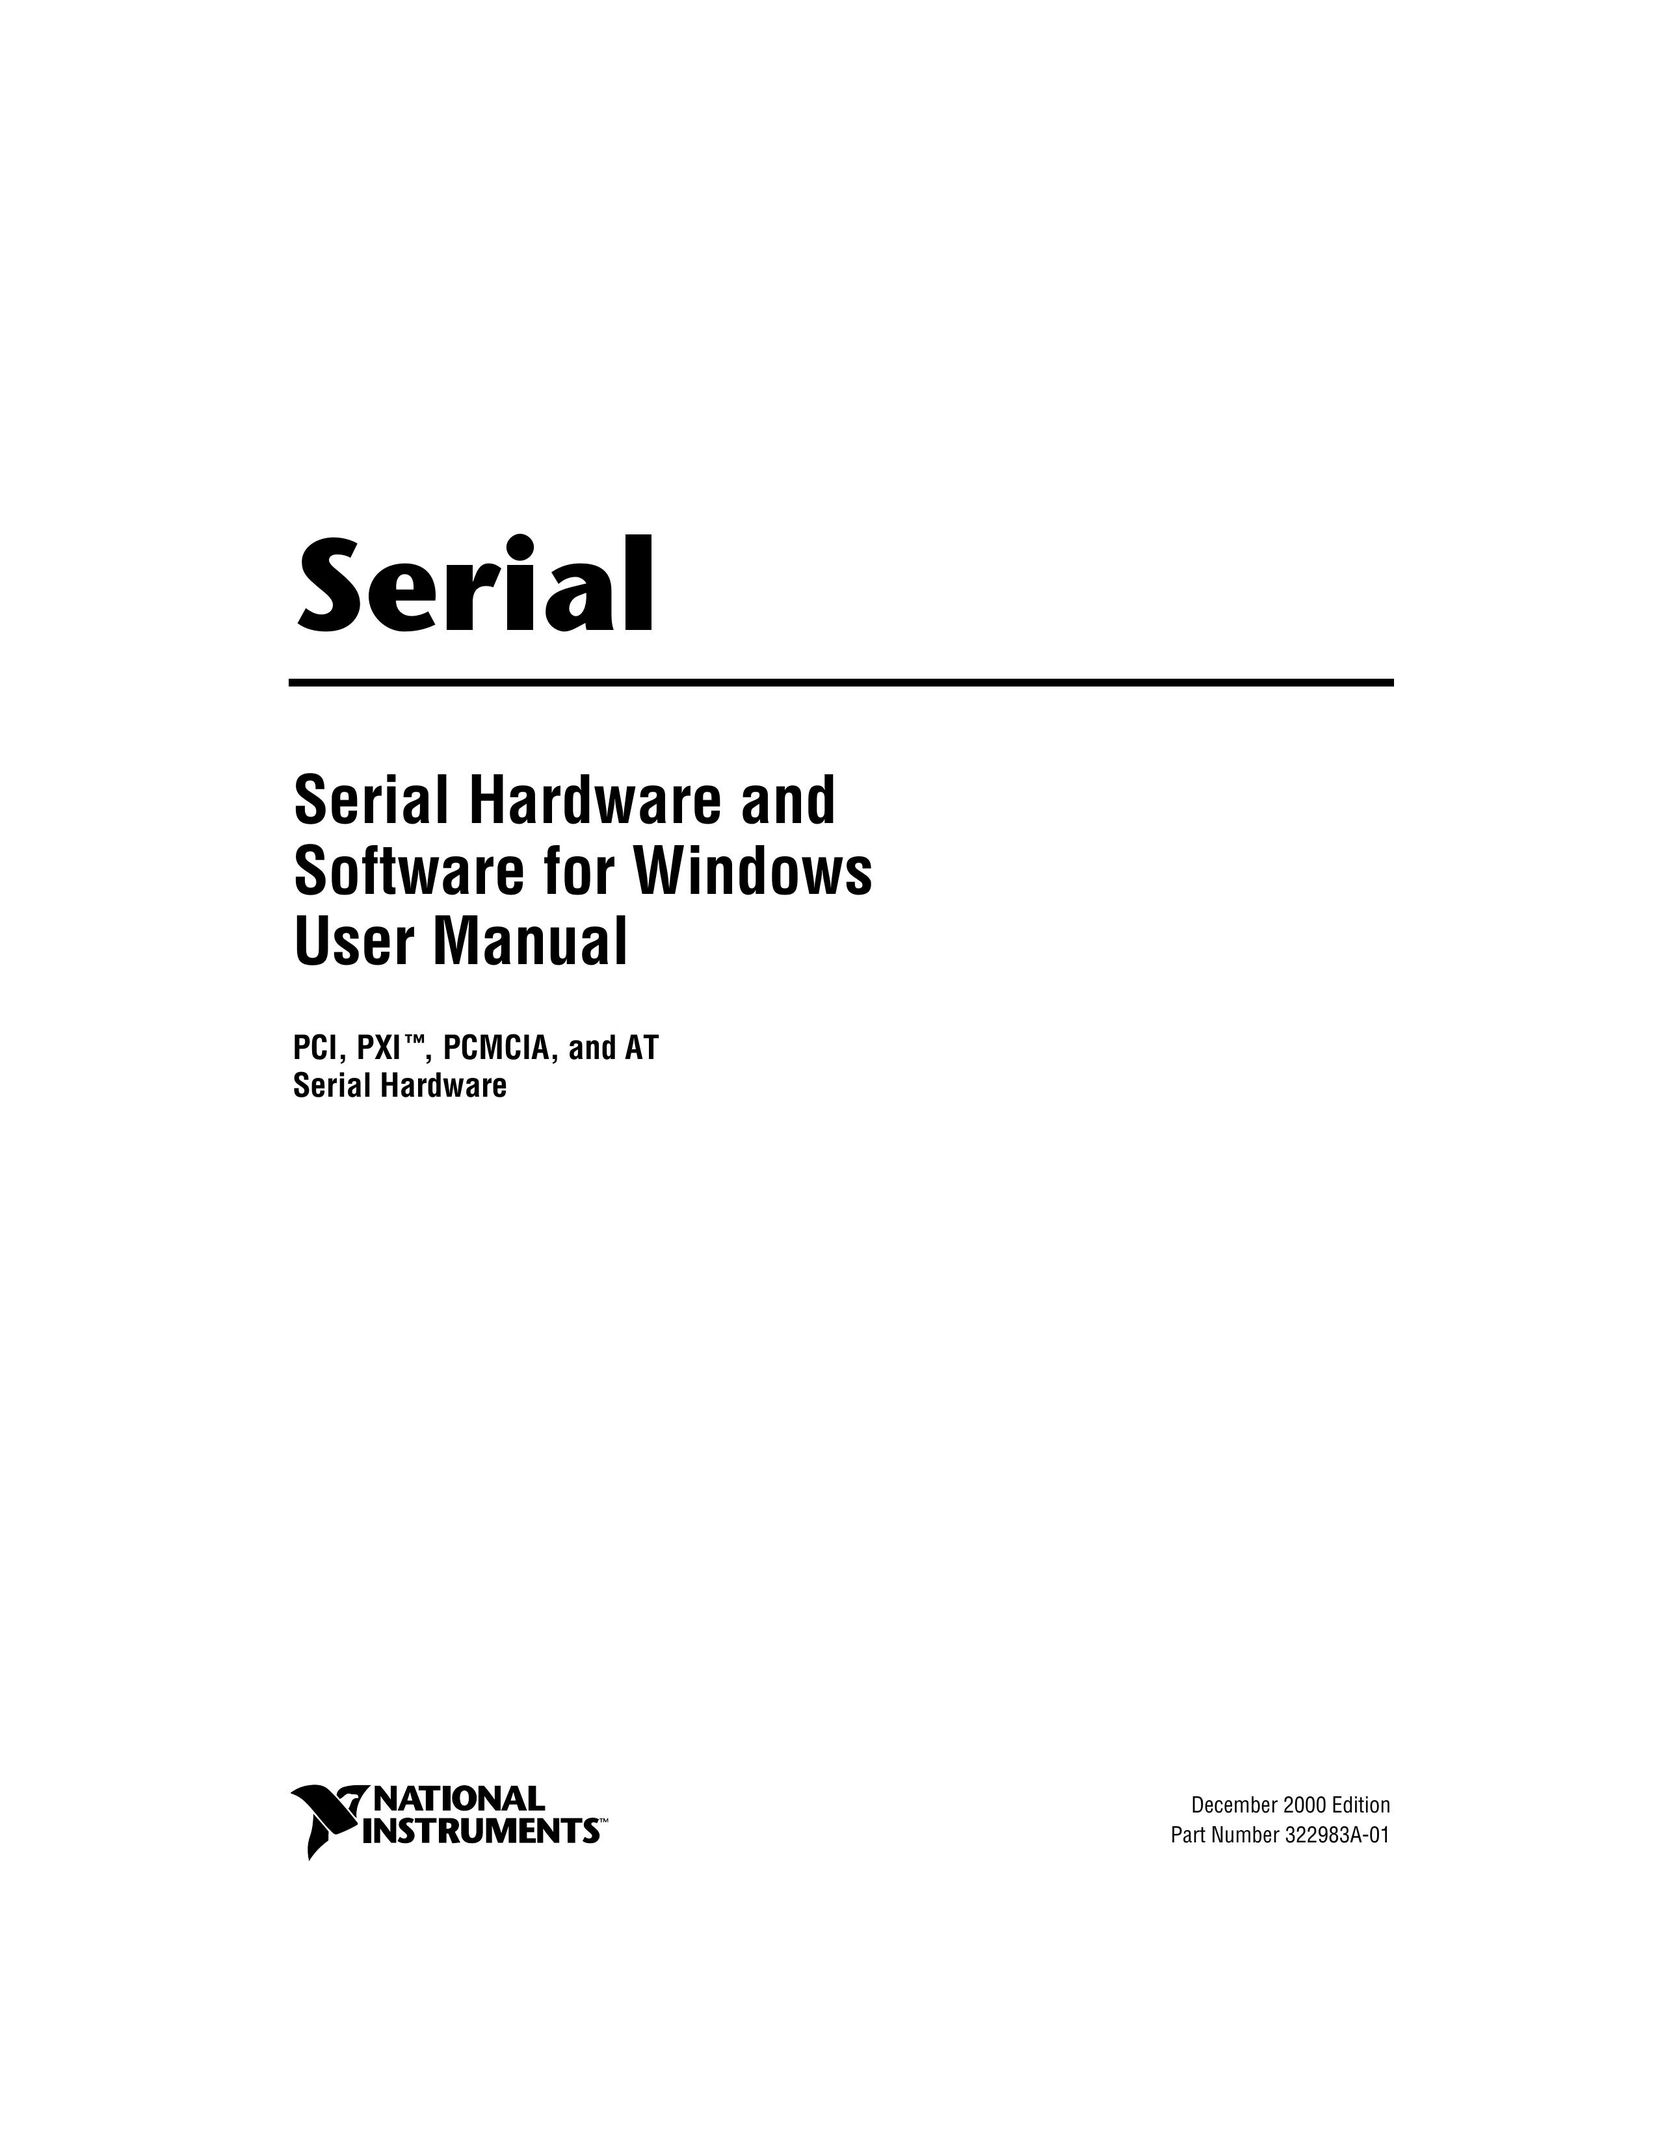 National Instruments Serial Hardware and Software for Windows User Manual Computer Hardware User Manual